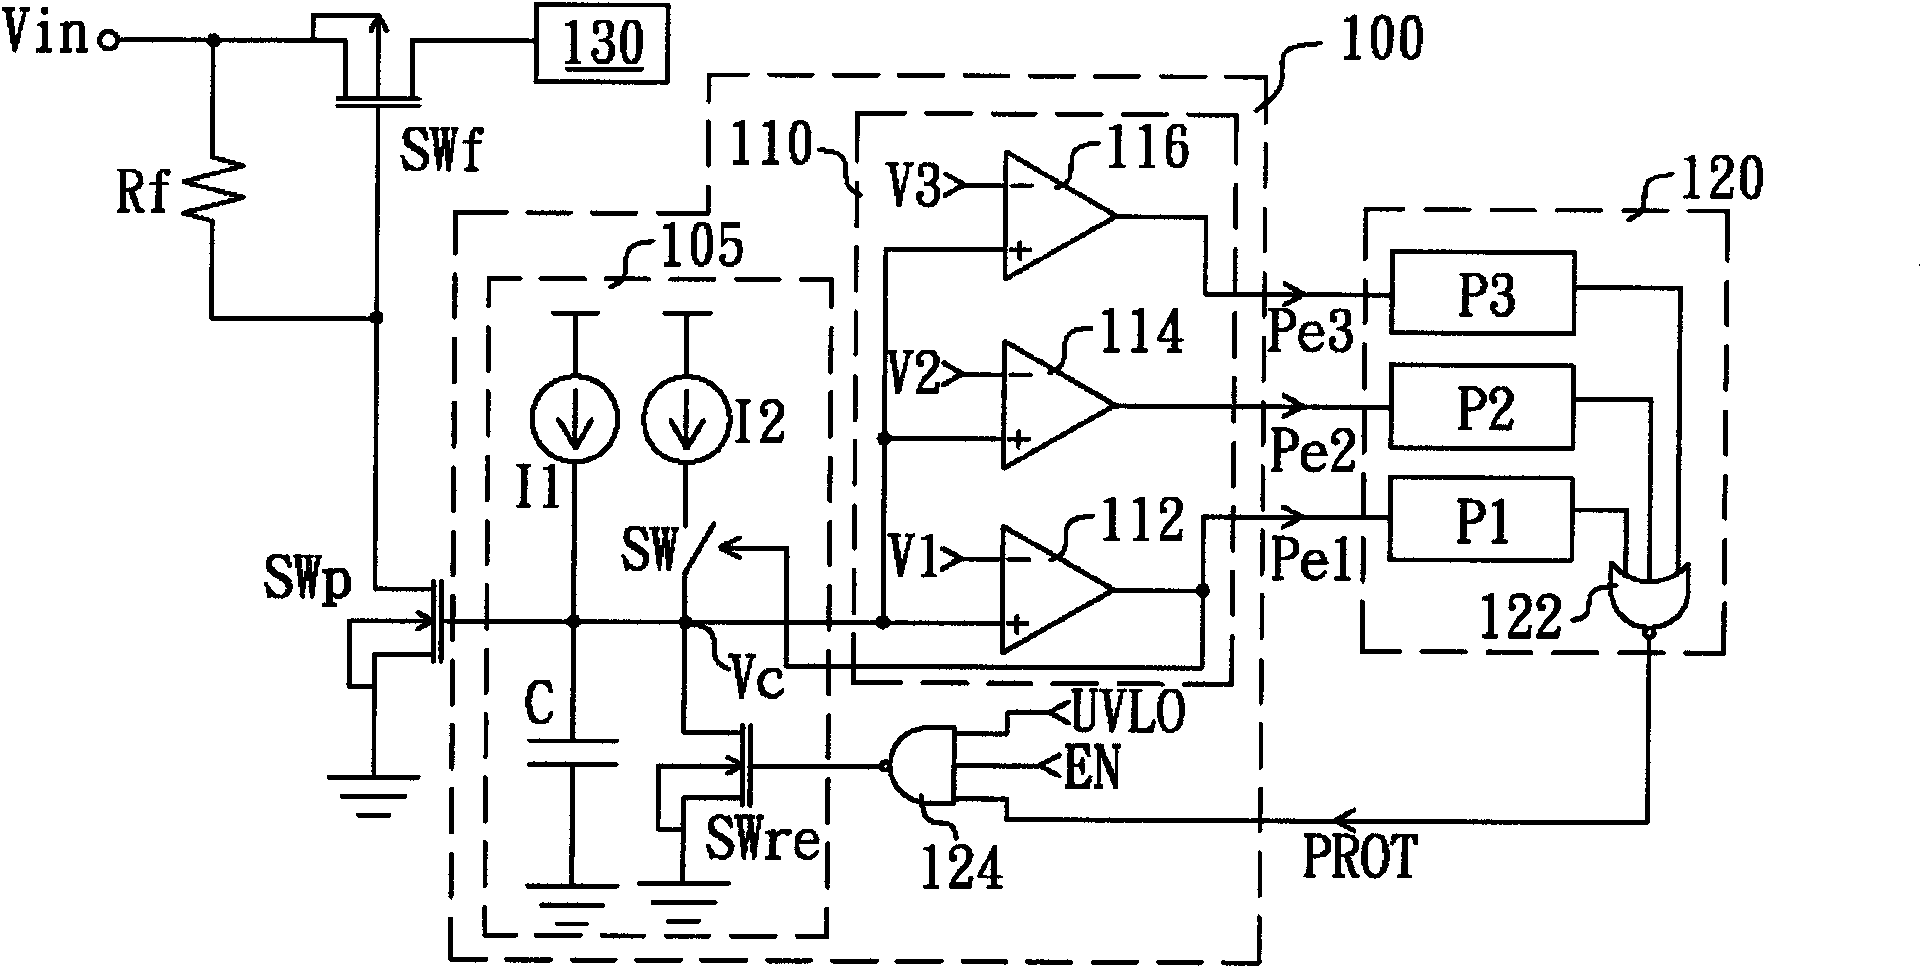 Power conversion circuit and conversion controller